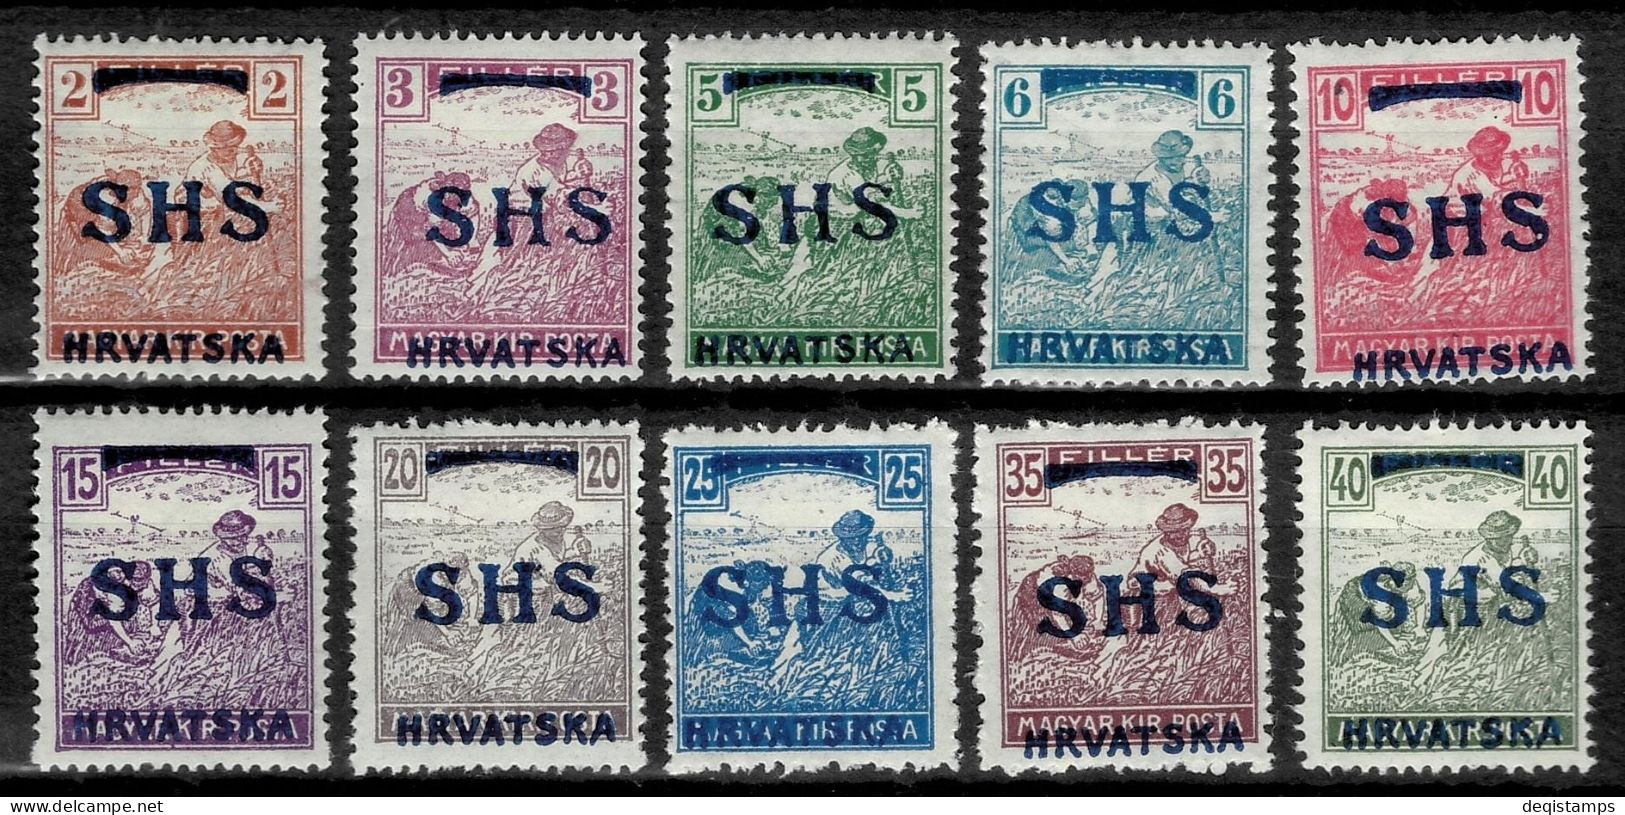 SHS - Croatia Stamps 1918 Set Hungary Postage MH Stamps Overprinted - Unused Stamps